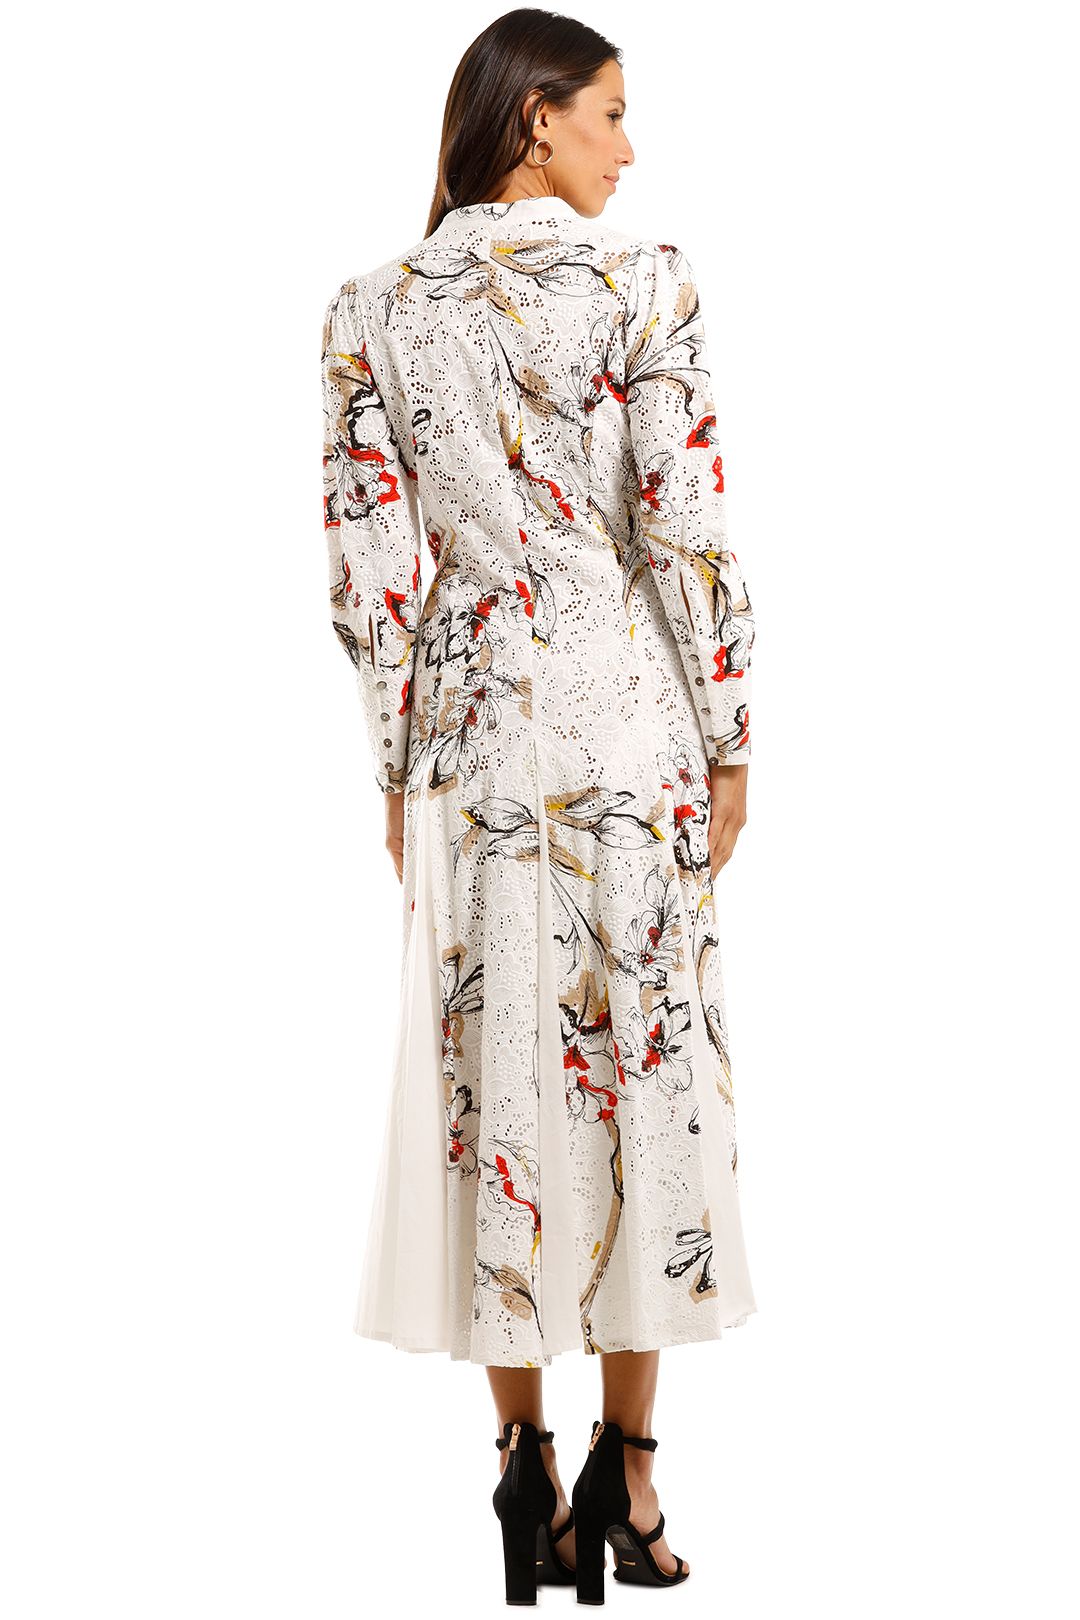 Moss and Spy Louise Button Dress Floral